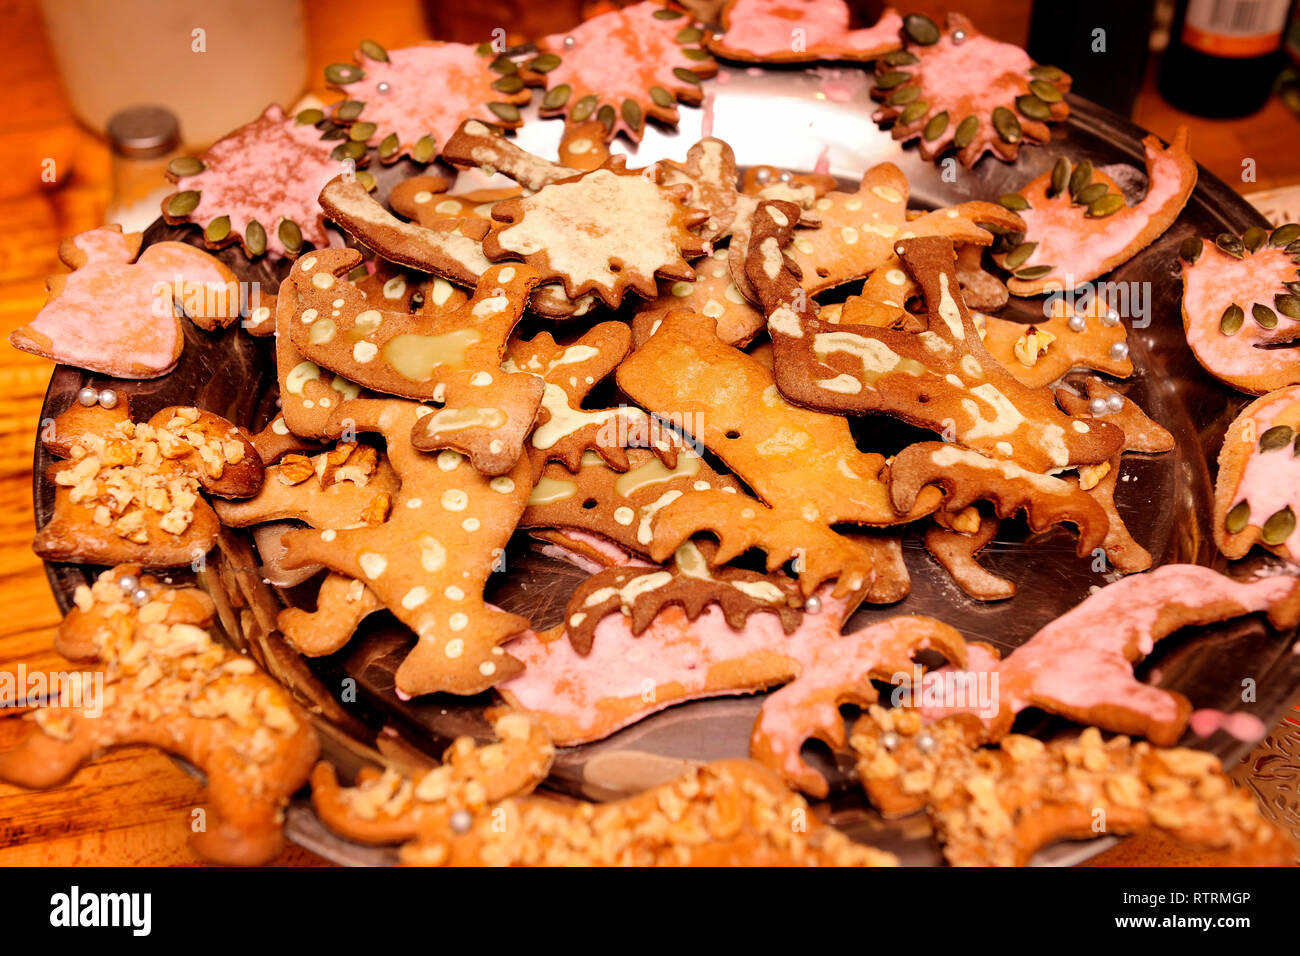 kitchen, baking, cakes, Christmas, baked goods, home made, sweetness, calorie, Stock Photo